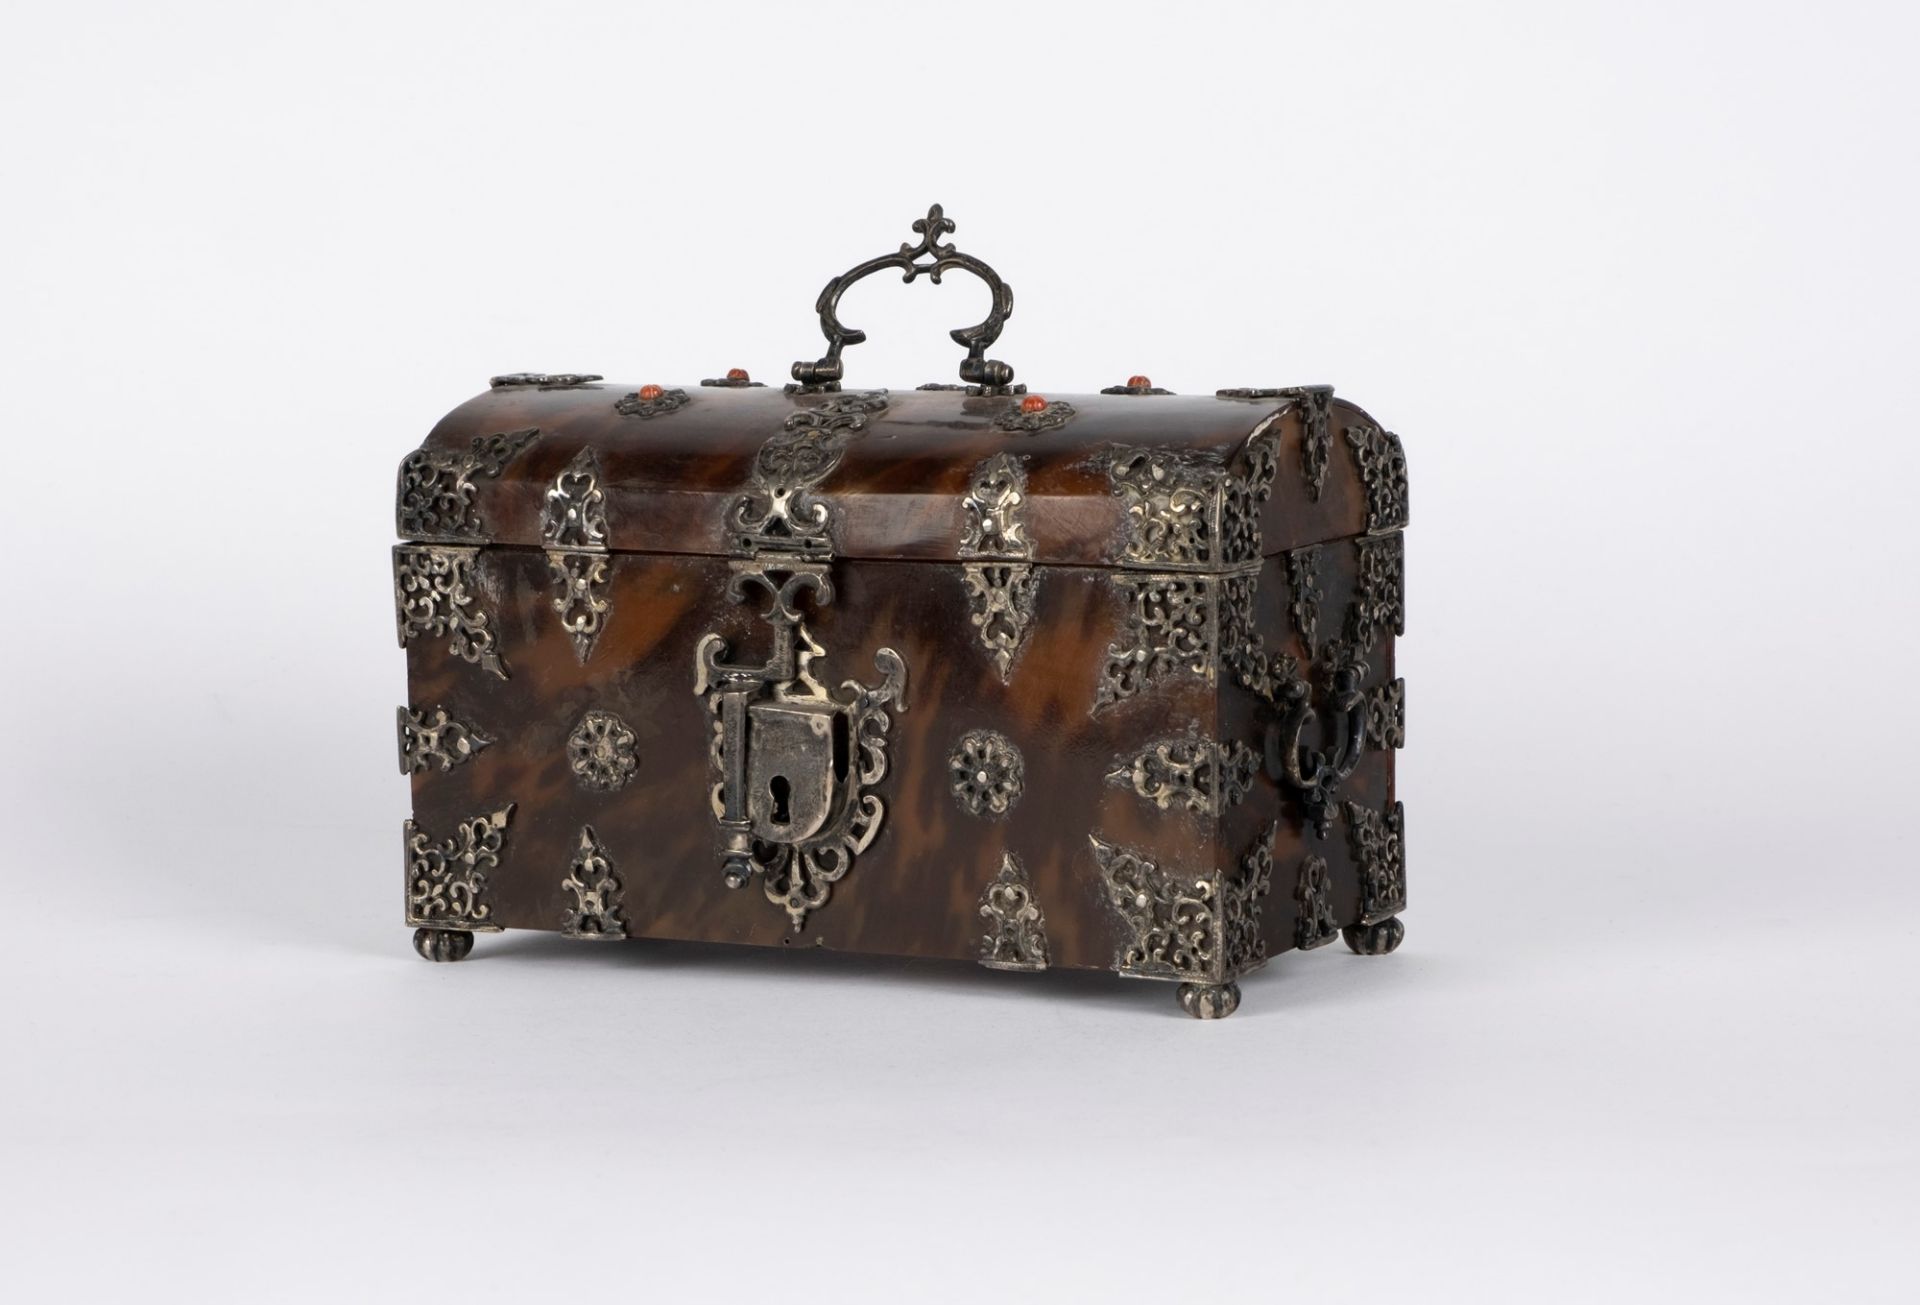 ☼ Turtle casket. Portuguese manufacture, 18th/19th century - Image 3 of 3